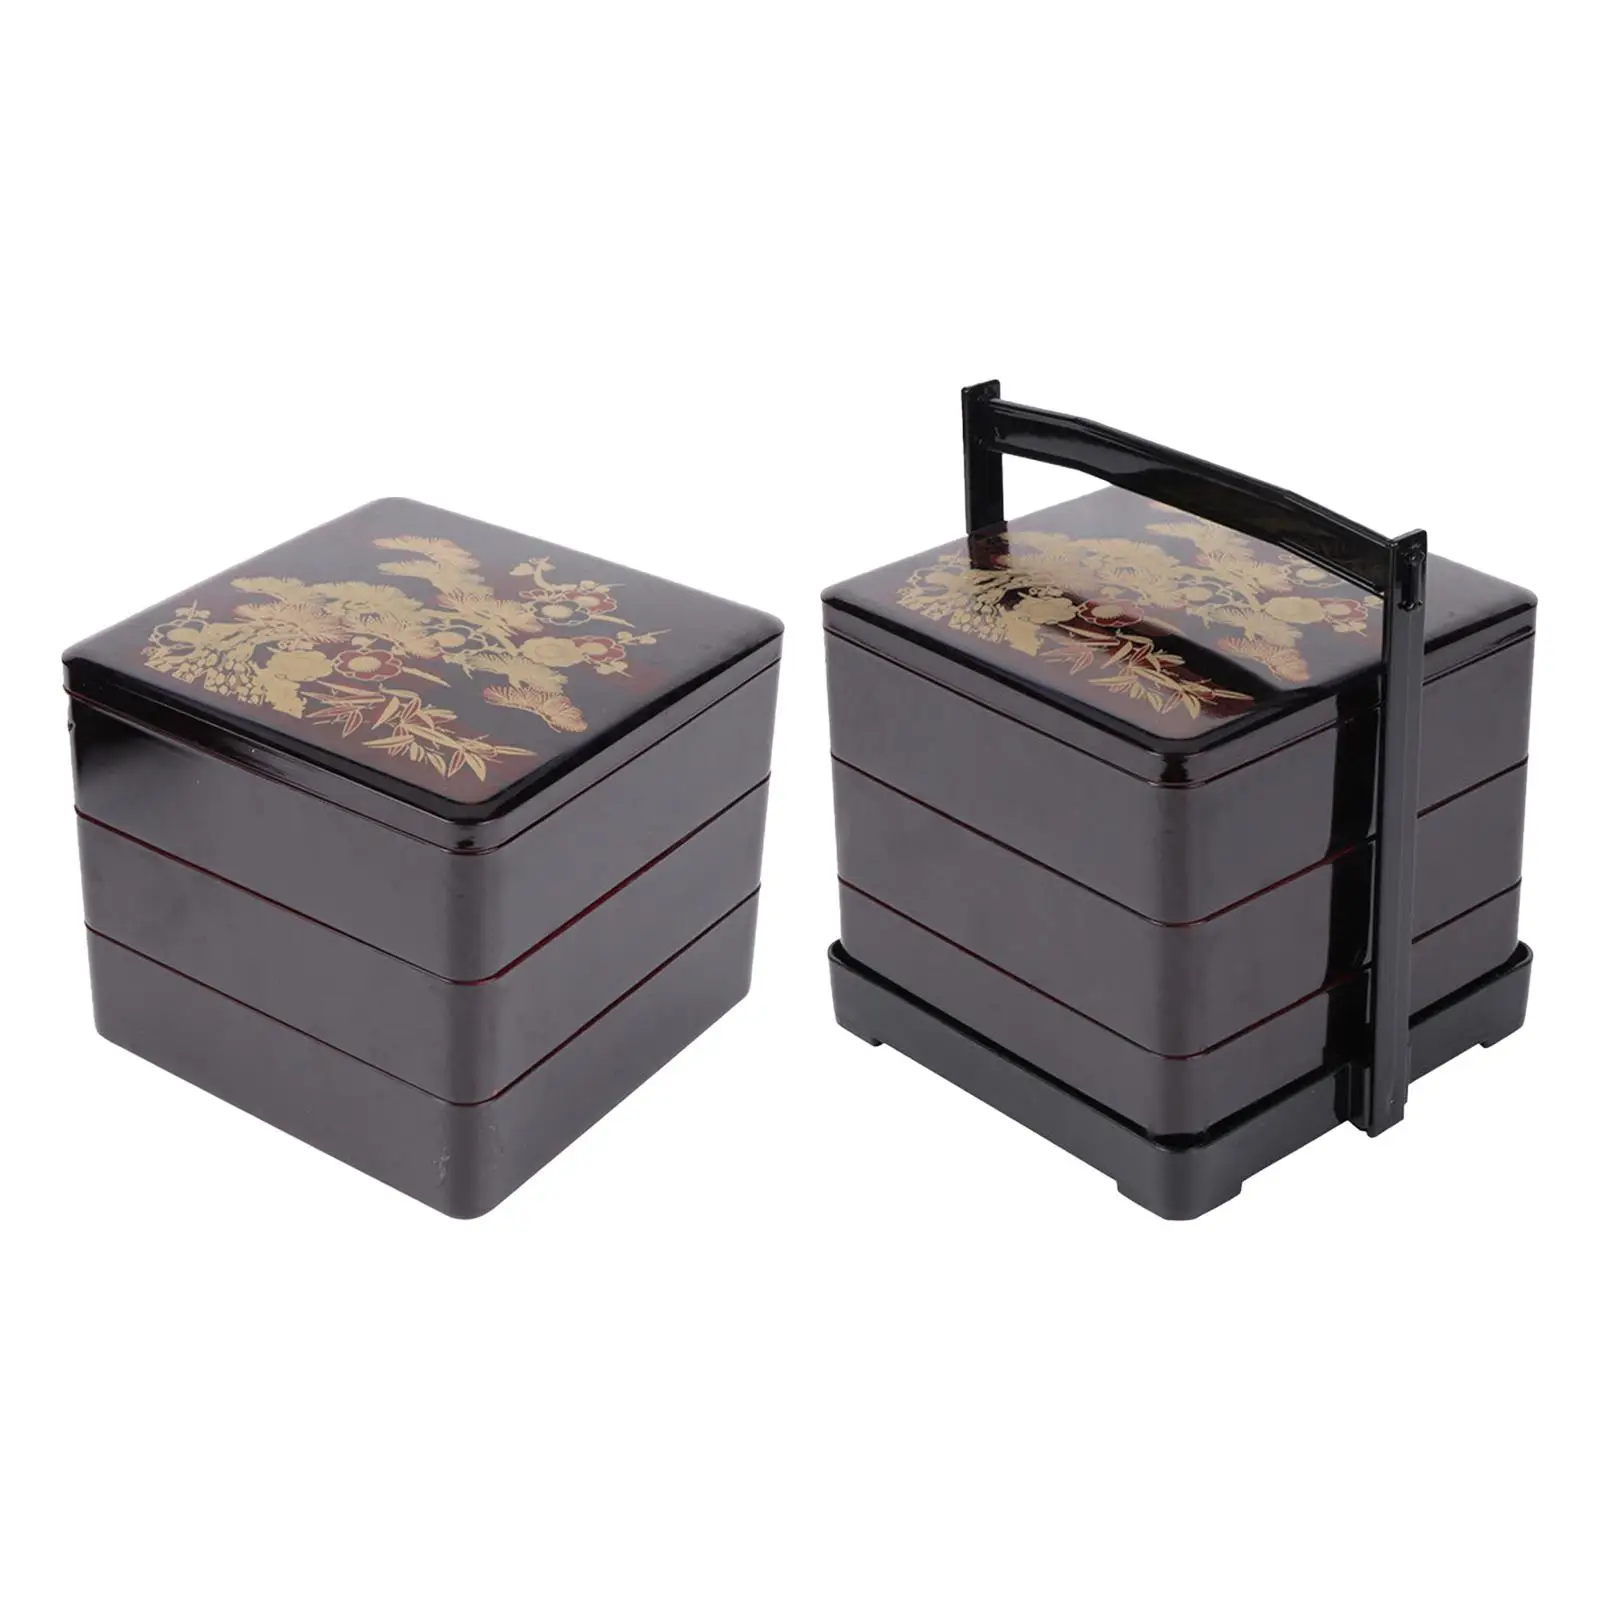 Lunch Box Picnic Stackable Kitchen Large Capacity with Lid 3 Layers Sushi, Rice, Sauce Business Picnic Tray Lunch Bento Box